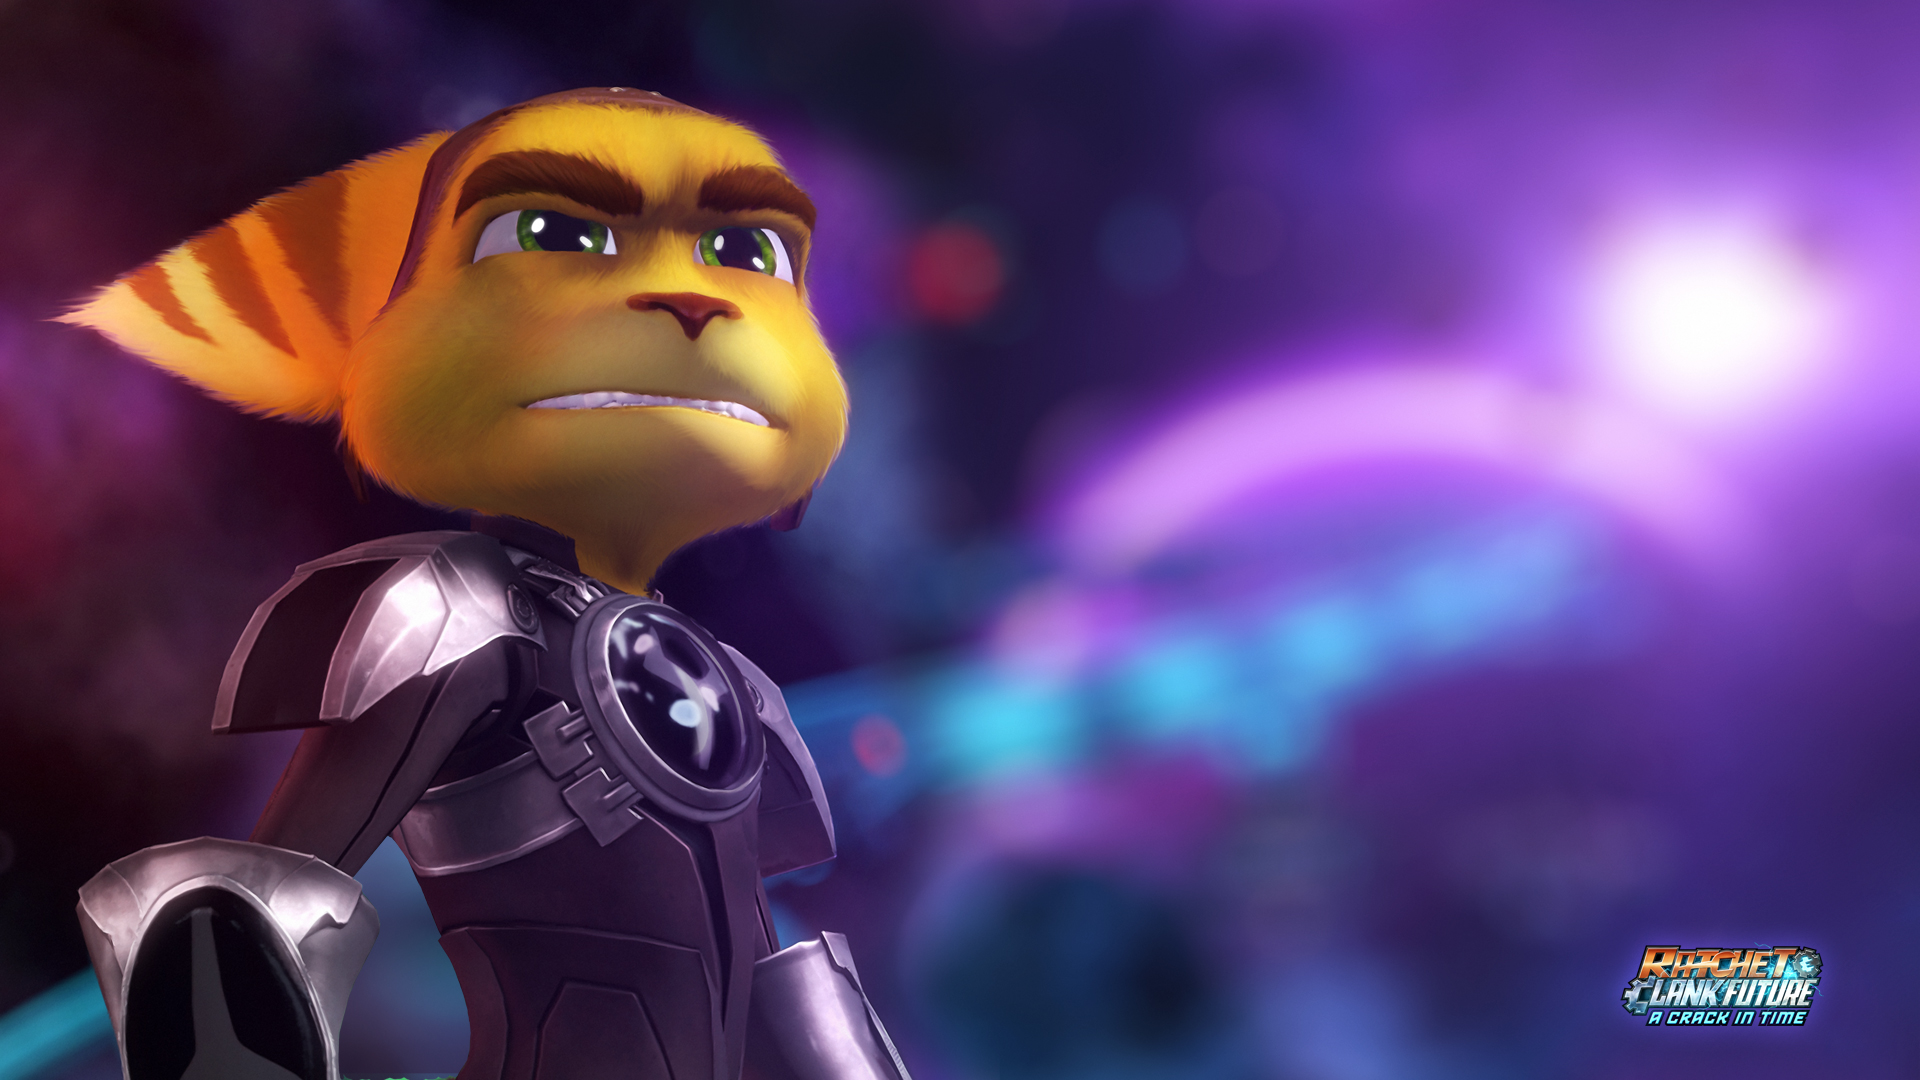 Ratchet and Clank wallpaper 1920x1080 1   hebusorg   High